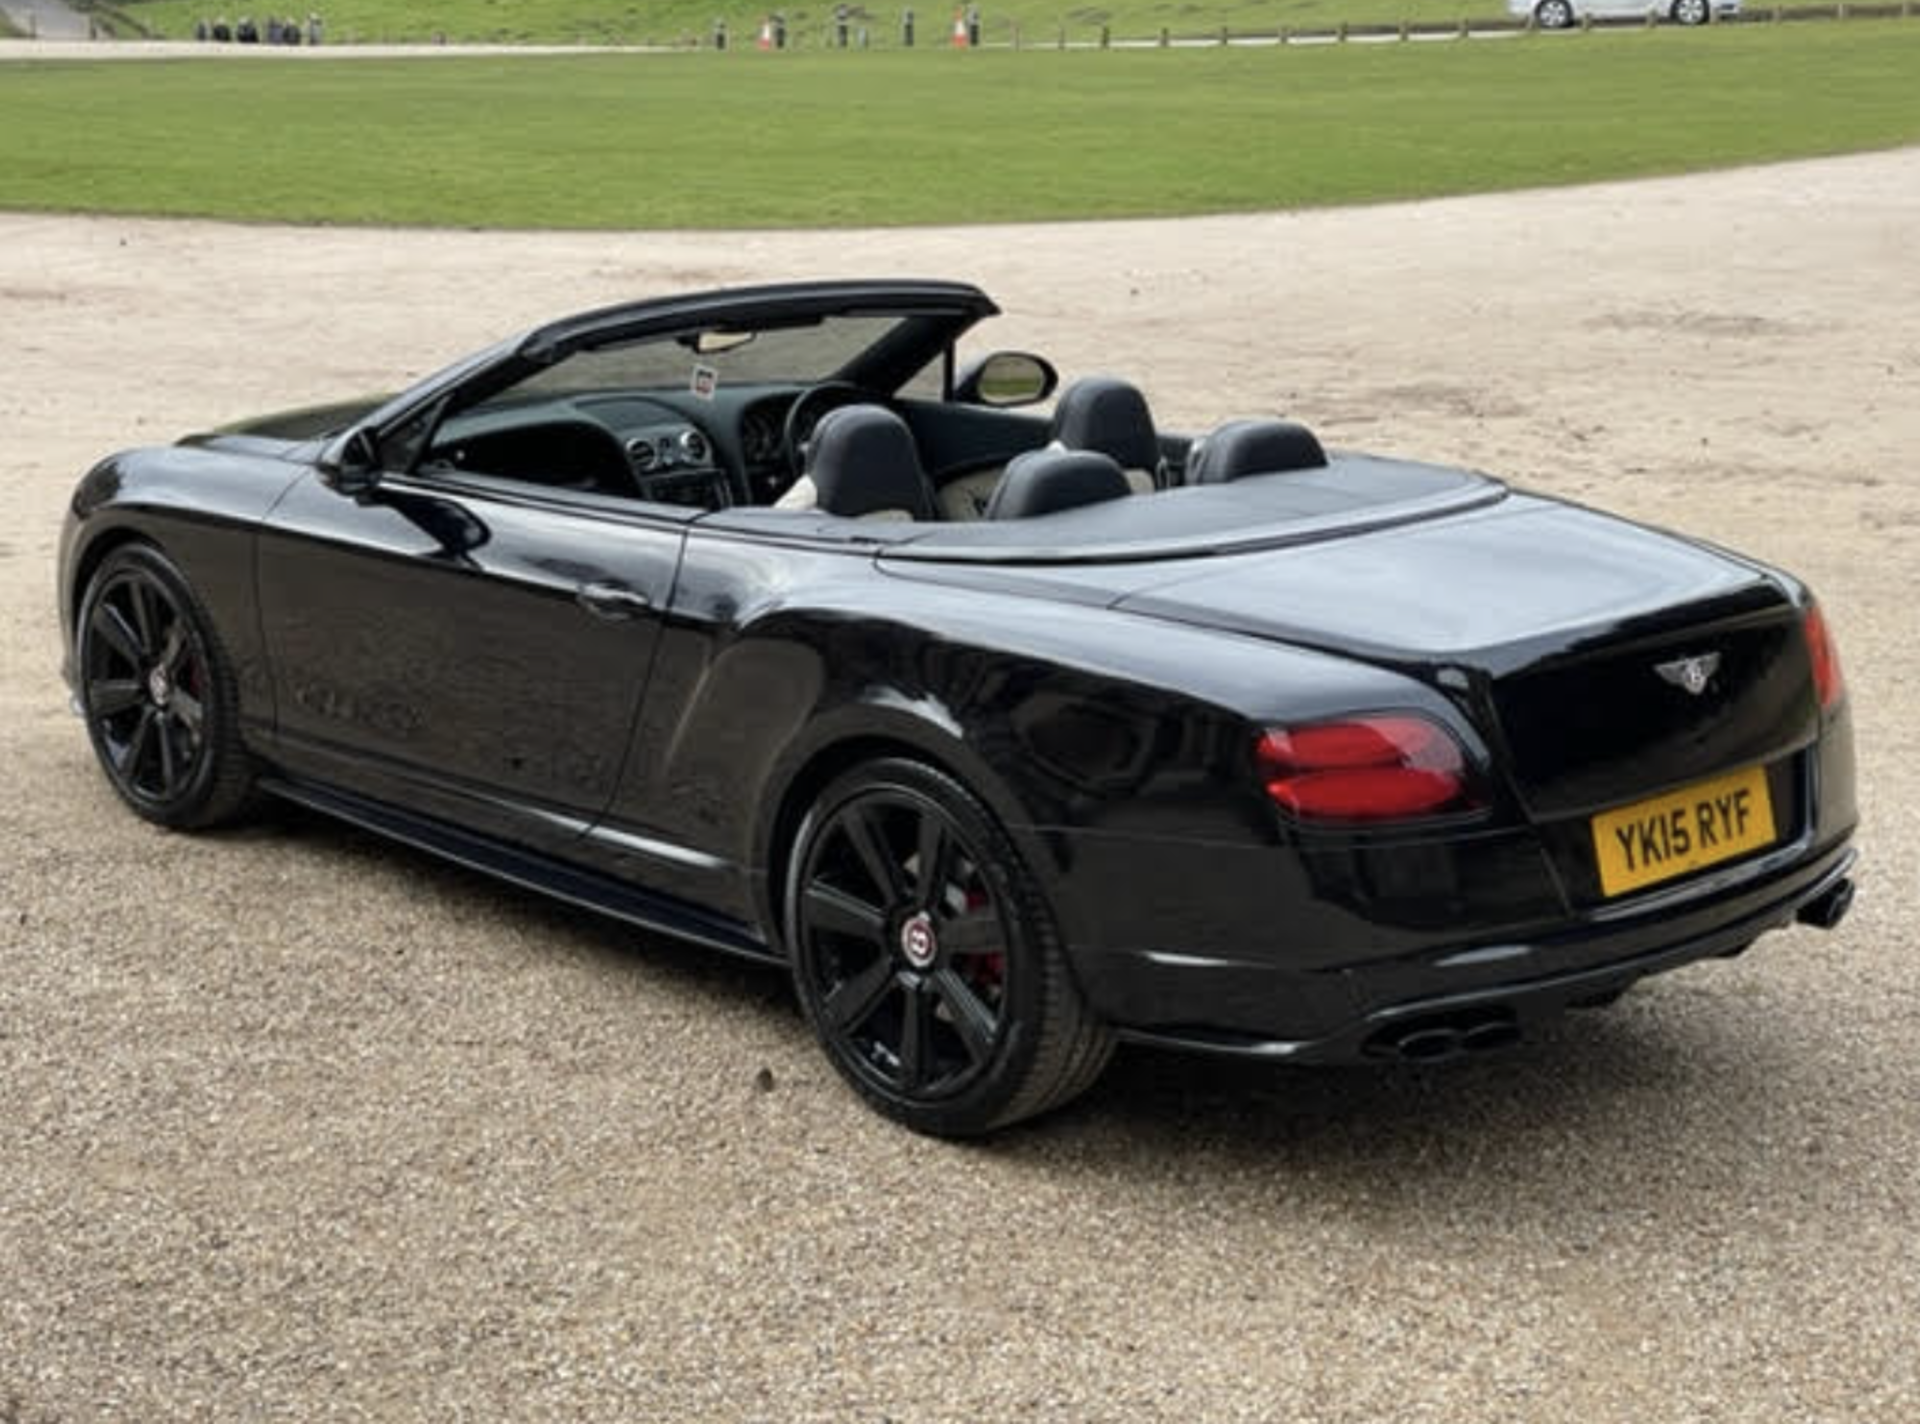 2015 Bentley Continental GTC 4.0 V8 S 2dr Auto Concourse series - Black pack 58,000 miles Full S/H - Image 16 of 18